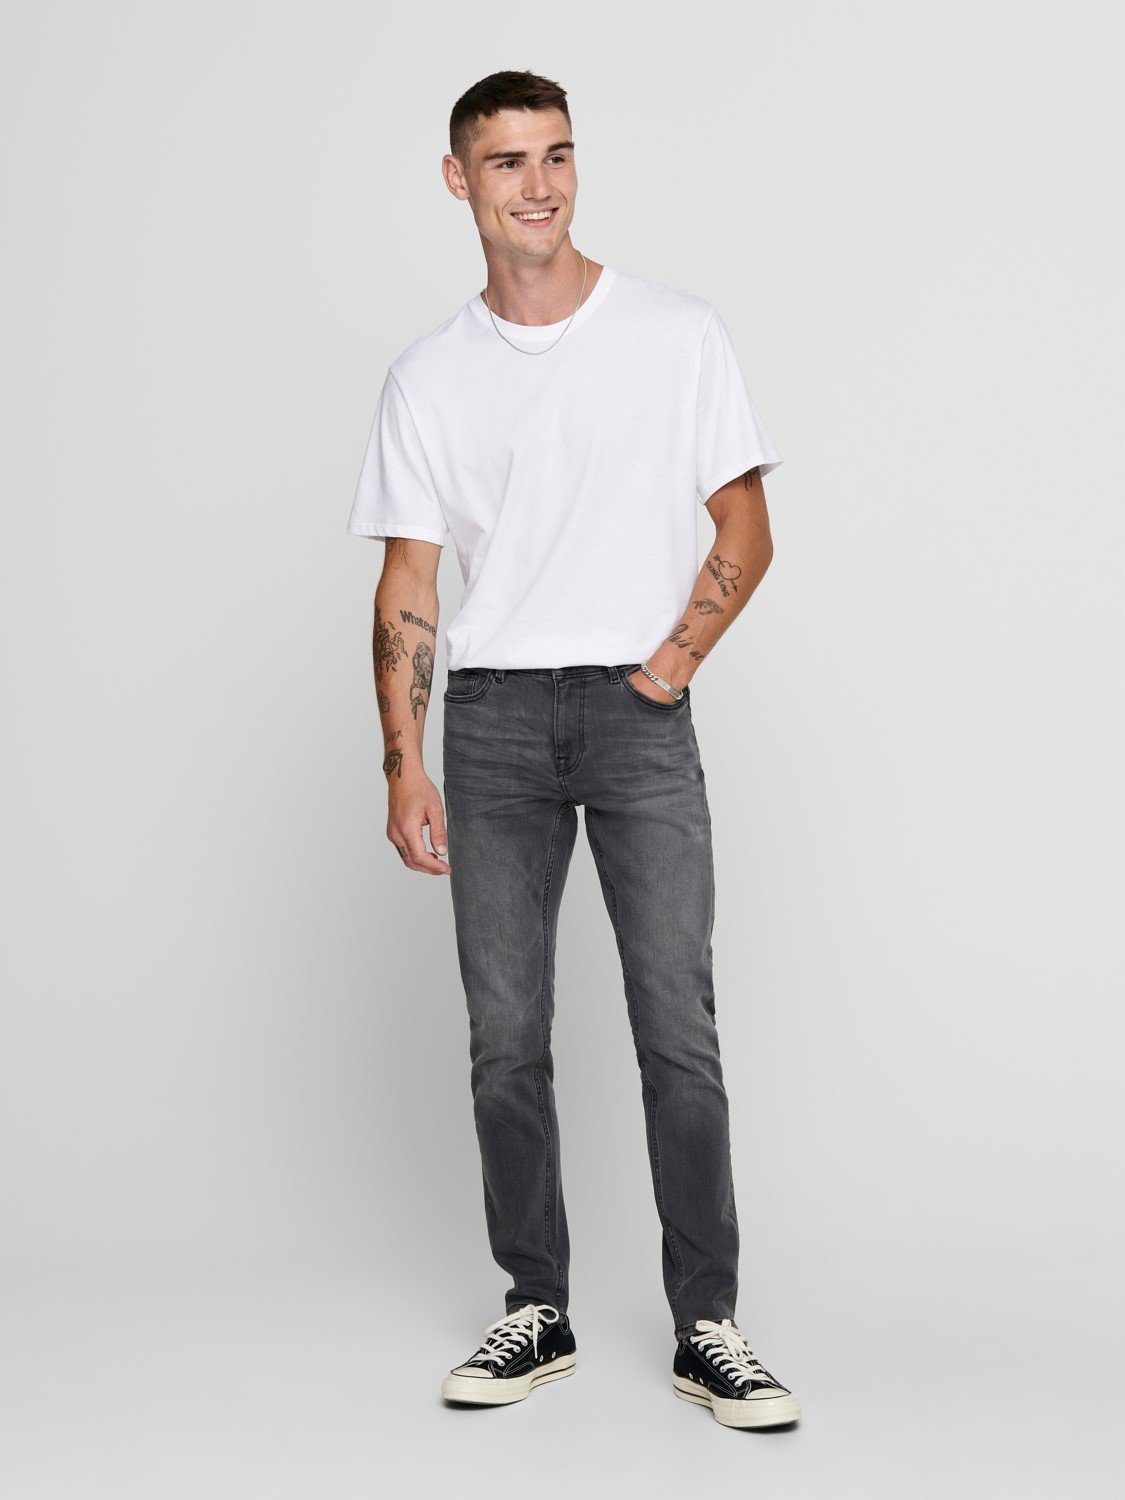 ONLY & SONS Slim-fit-Jeans Skinny Pants Hose Stoned 3977 Fit Grau ONSWARP (1-tlg) Denim in Jeans Basic Washed